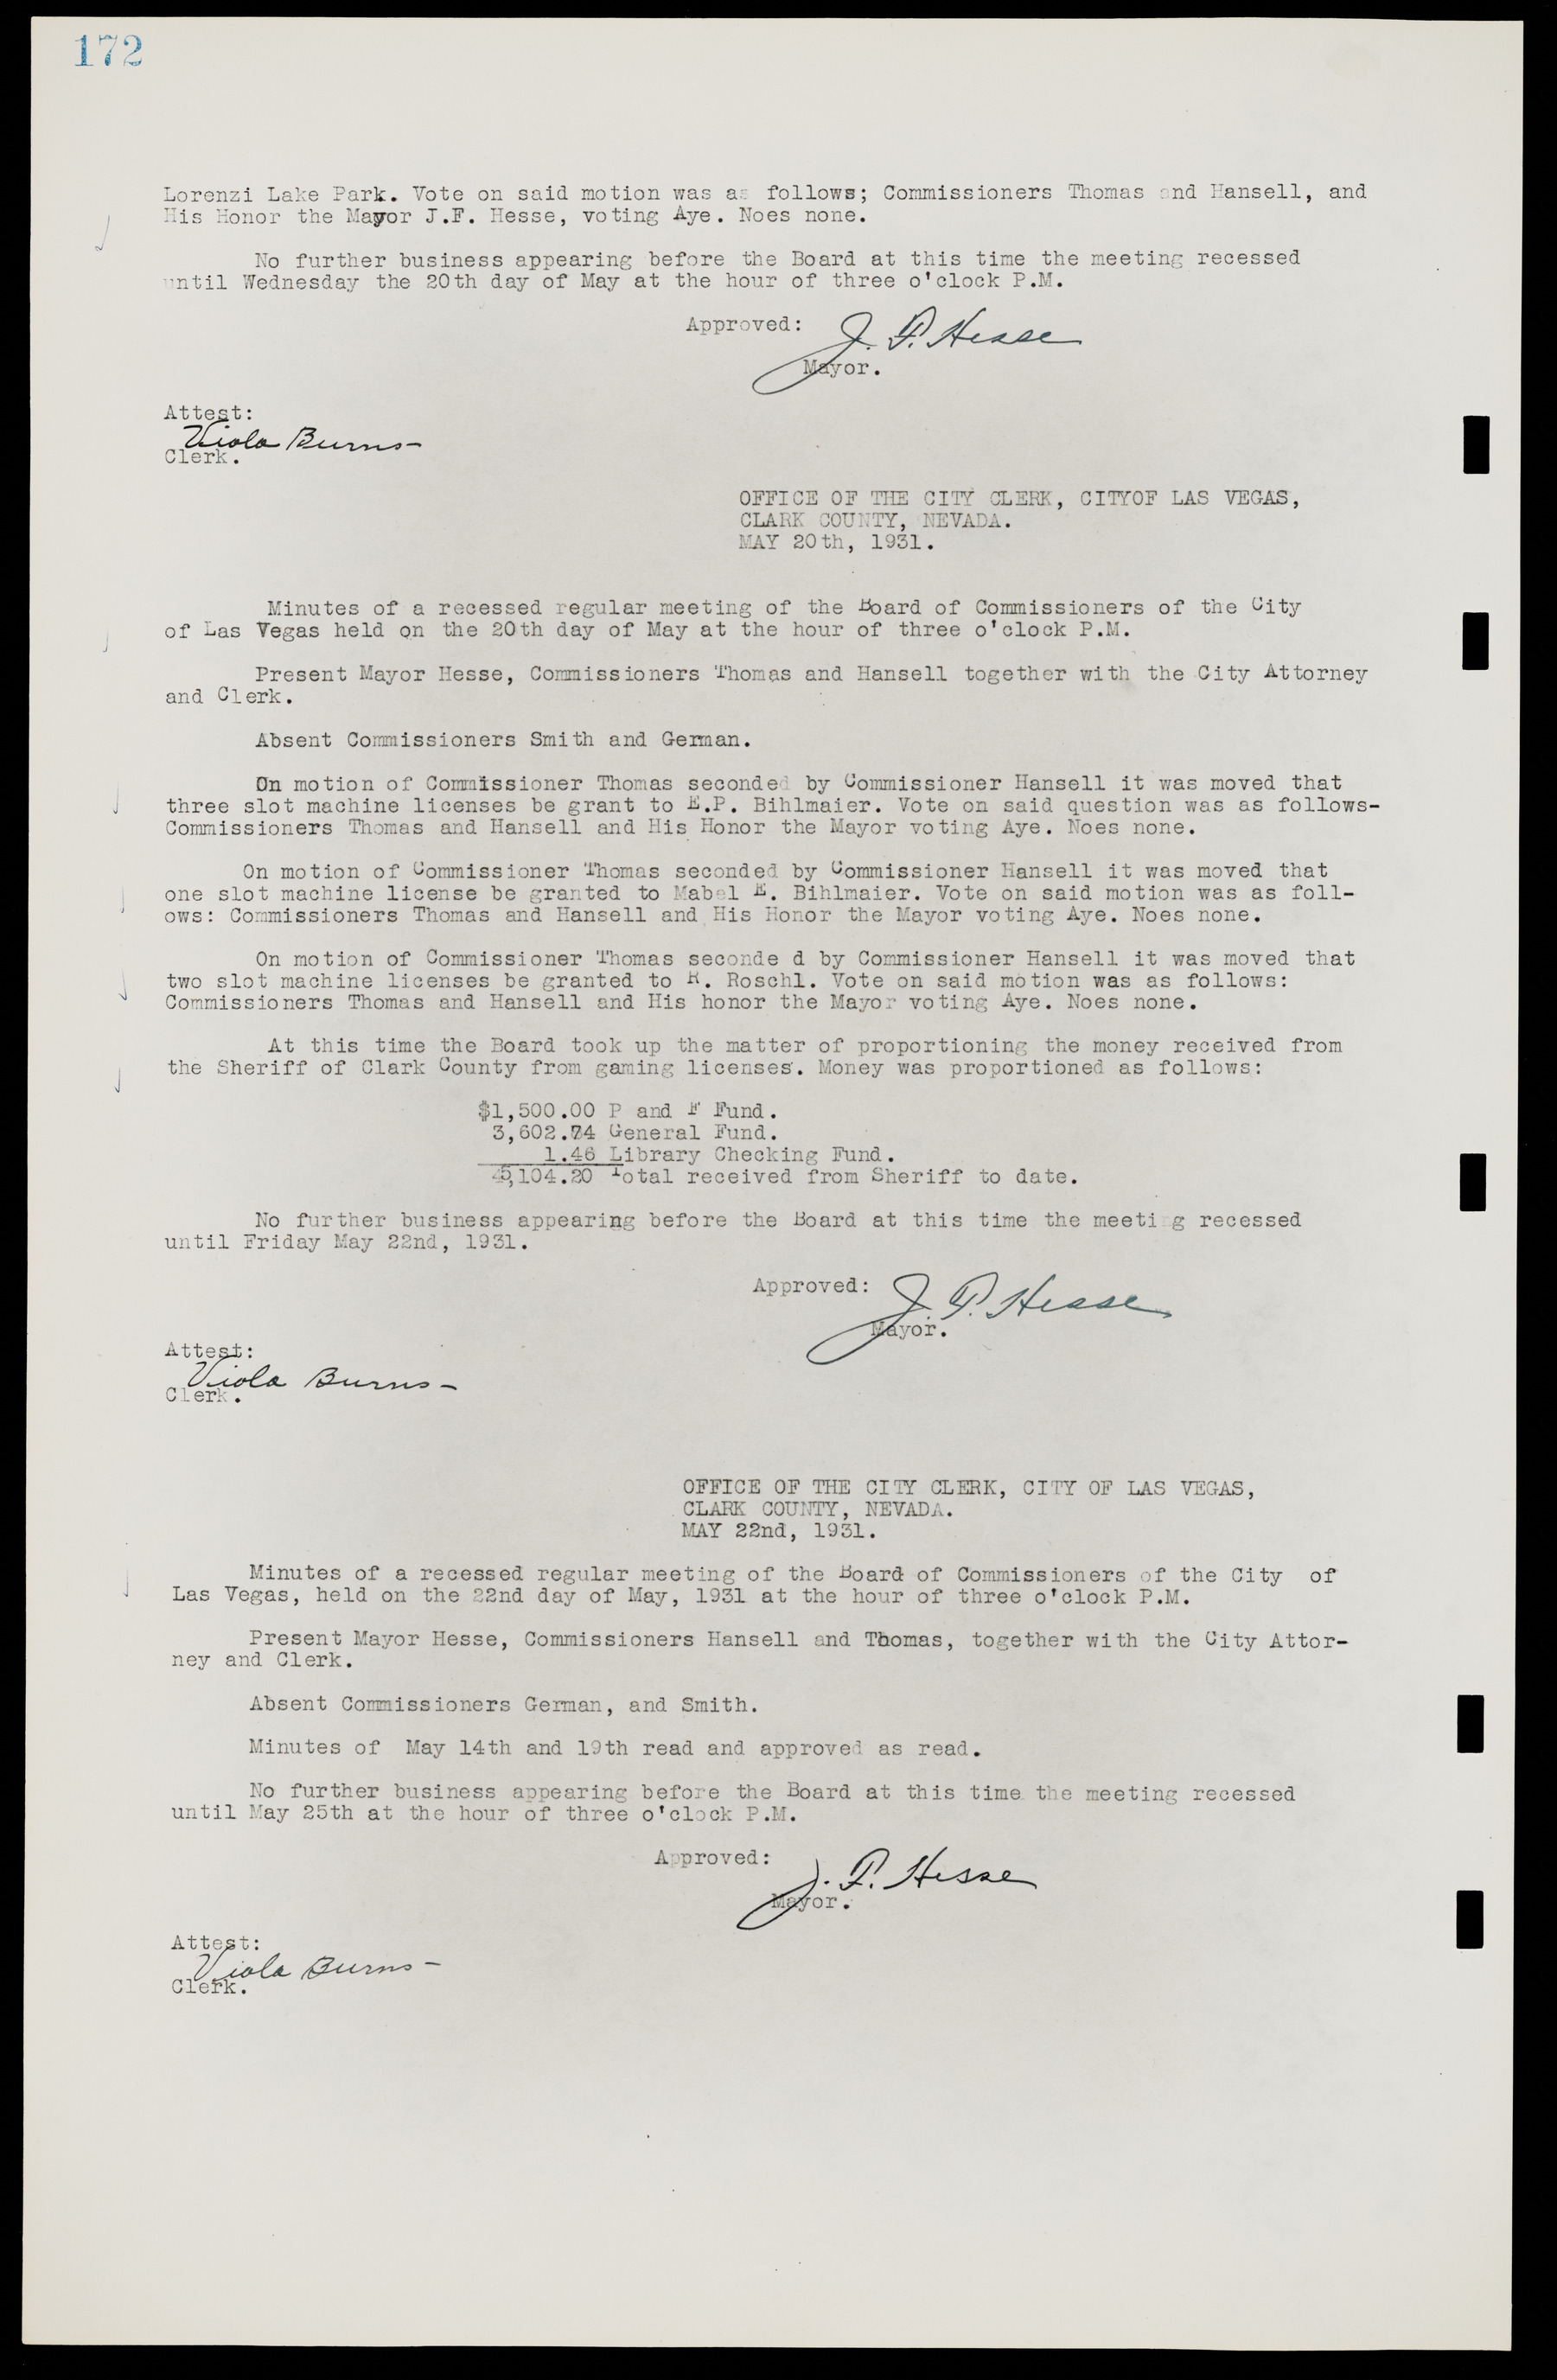 Las Vegas City Commission Minutes, May 14, 1929 to February 11, 1937, lvc000003-178